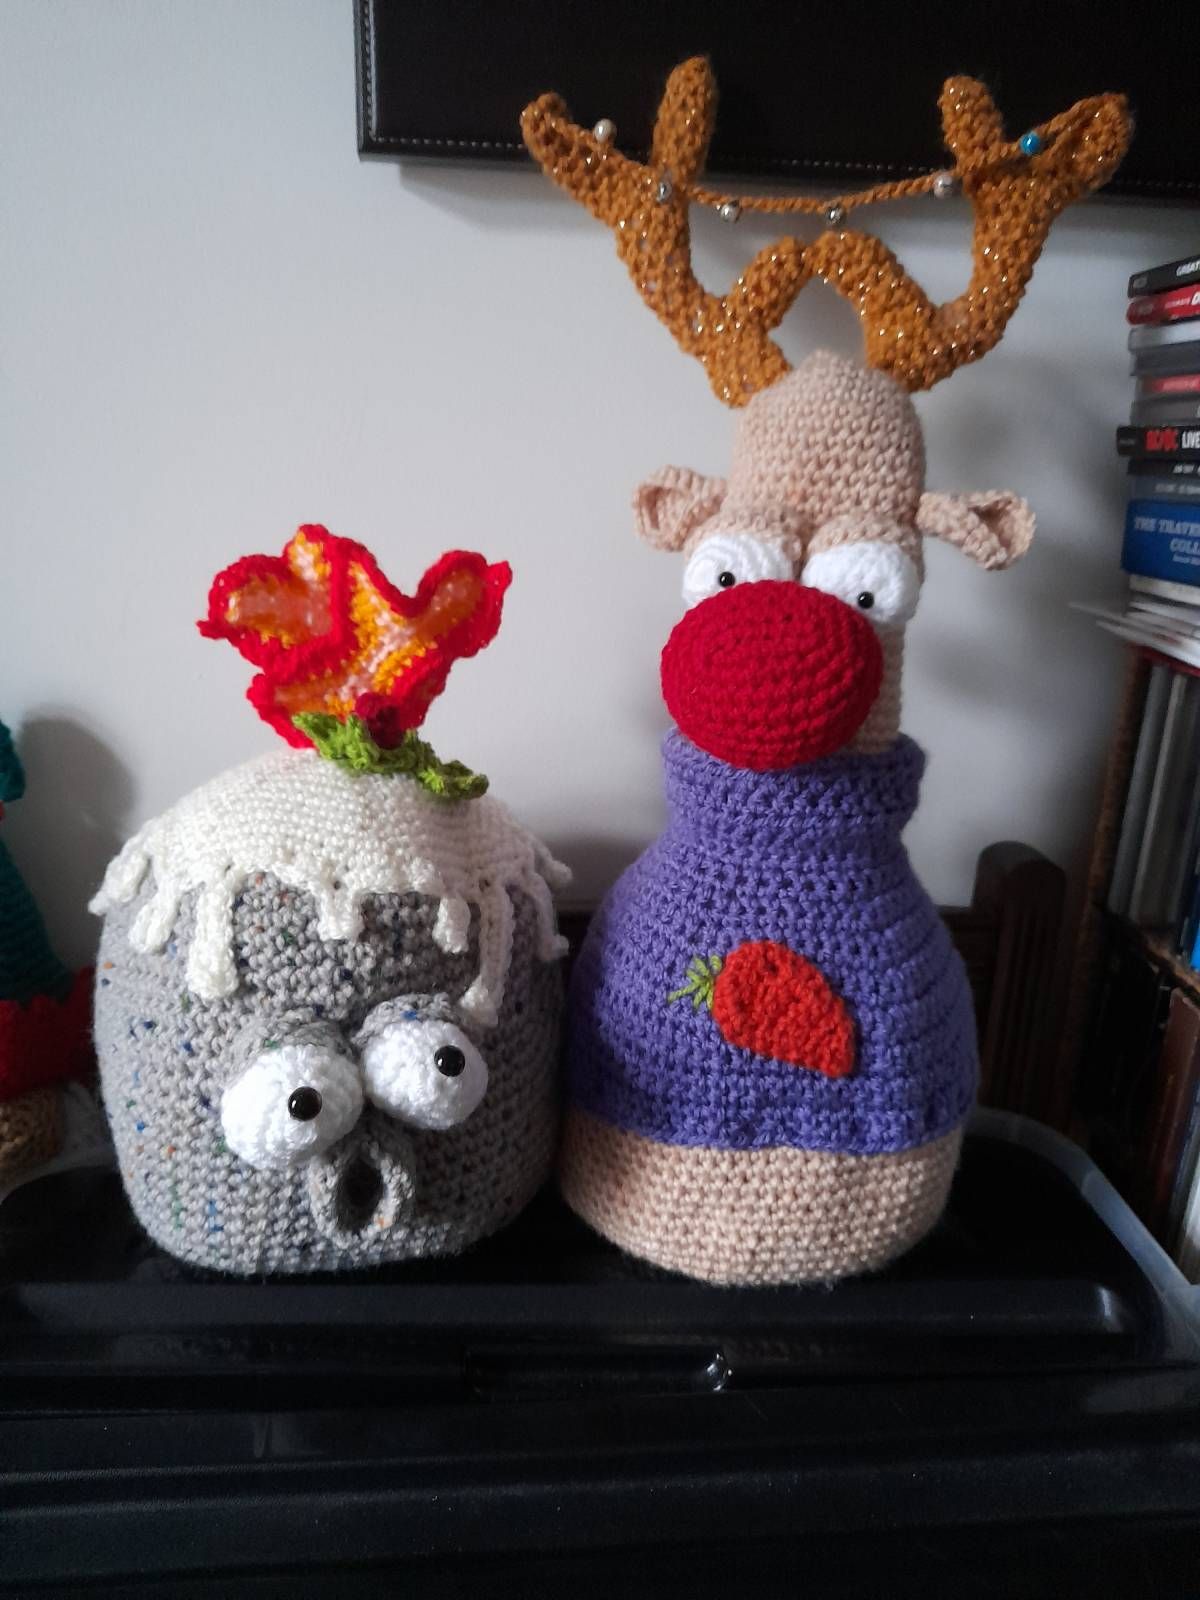 Christmas Amigurumi Crochet Patterns Review by chrismol1956 for Cottontail and Whiskers